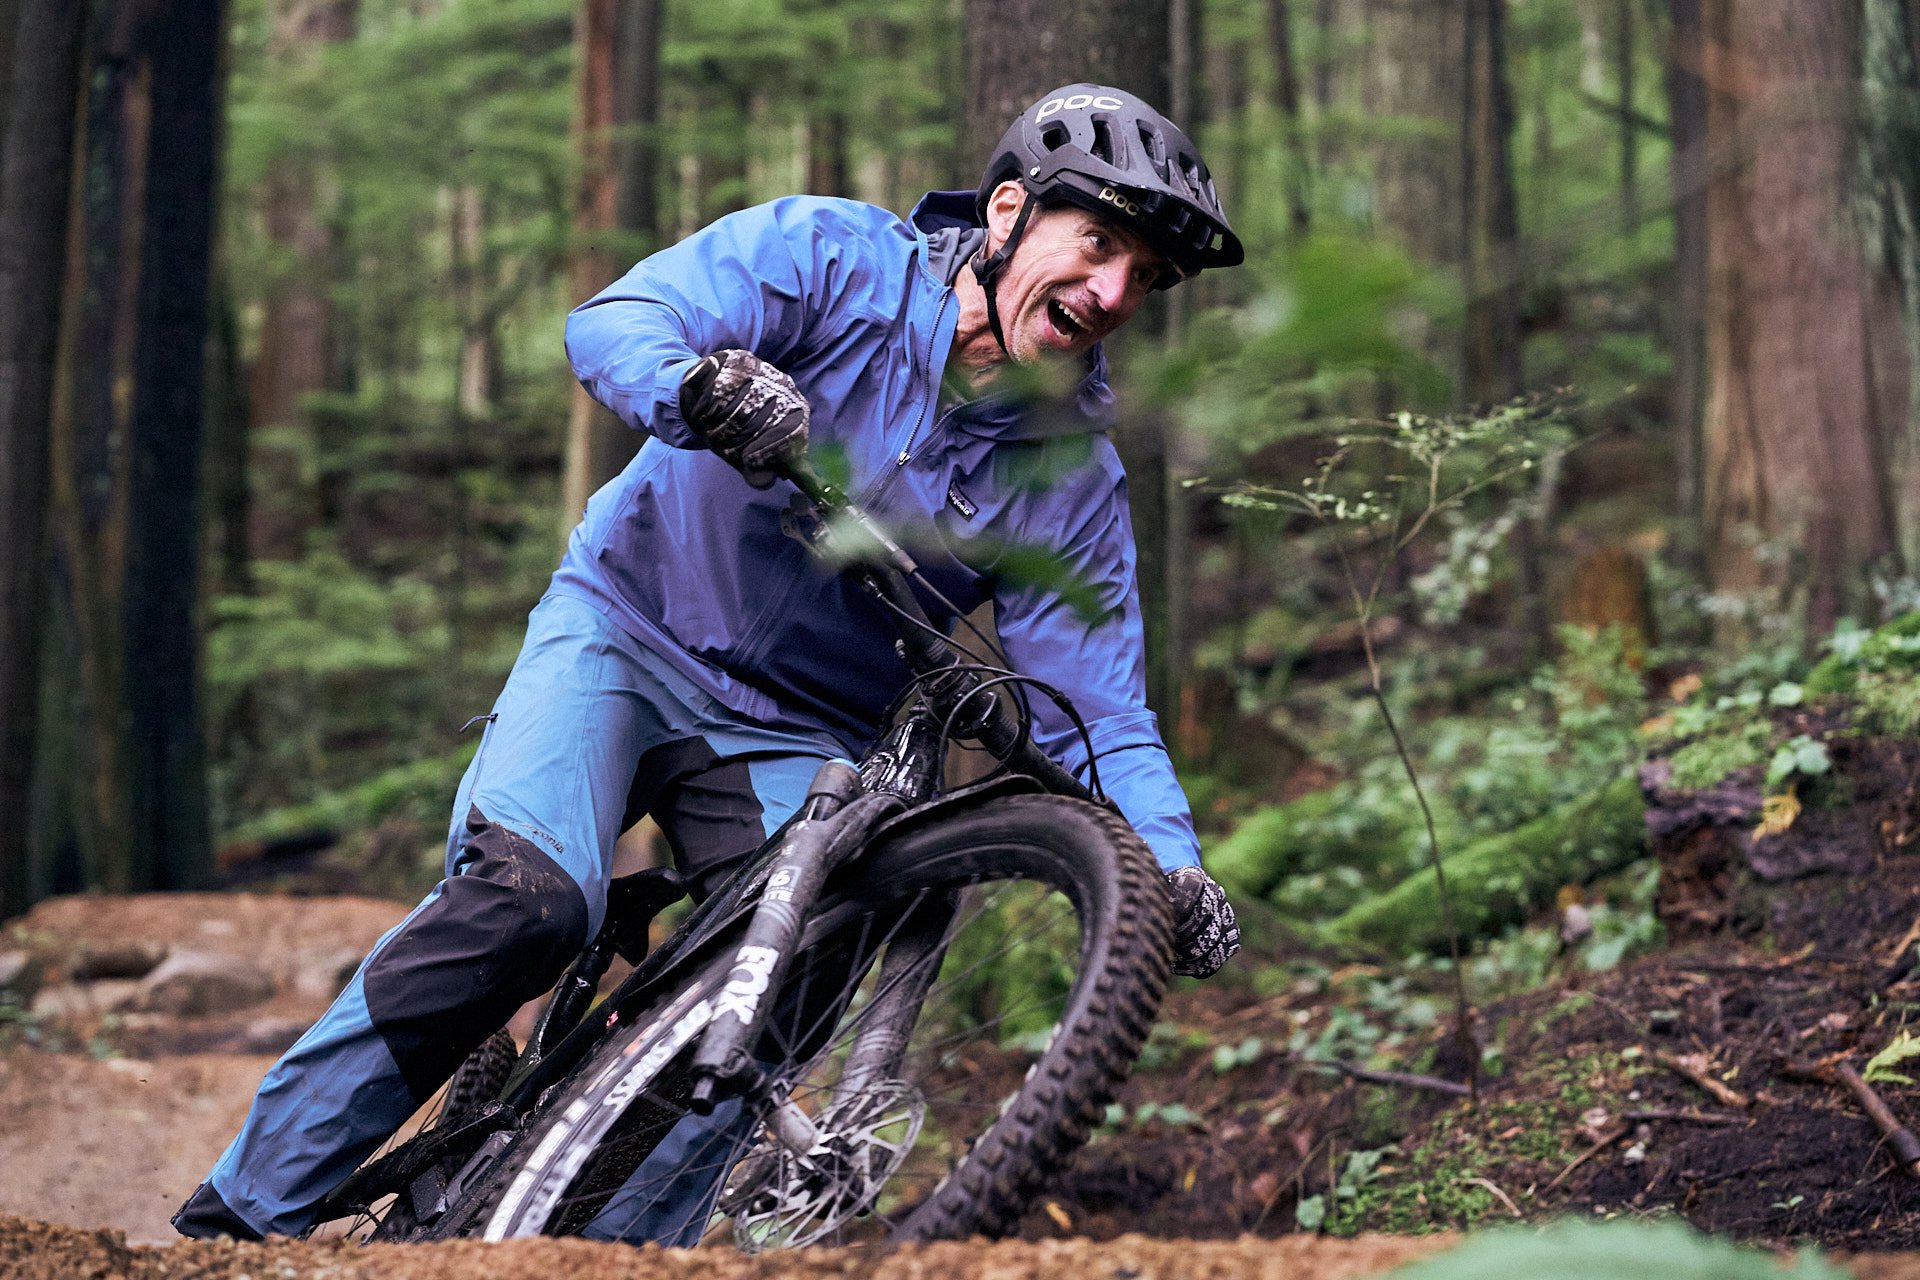 Leatt DBX 40 Pant Review  Light stretchy and cool mountain bike pants